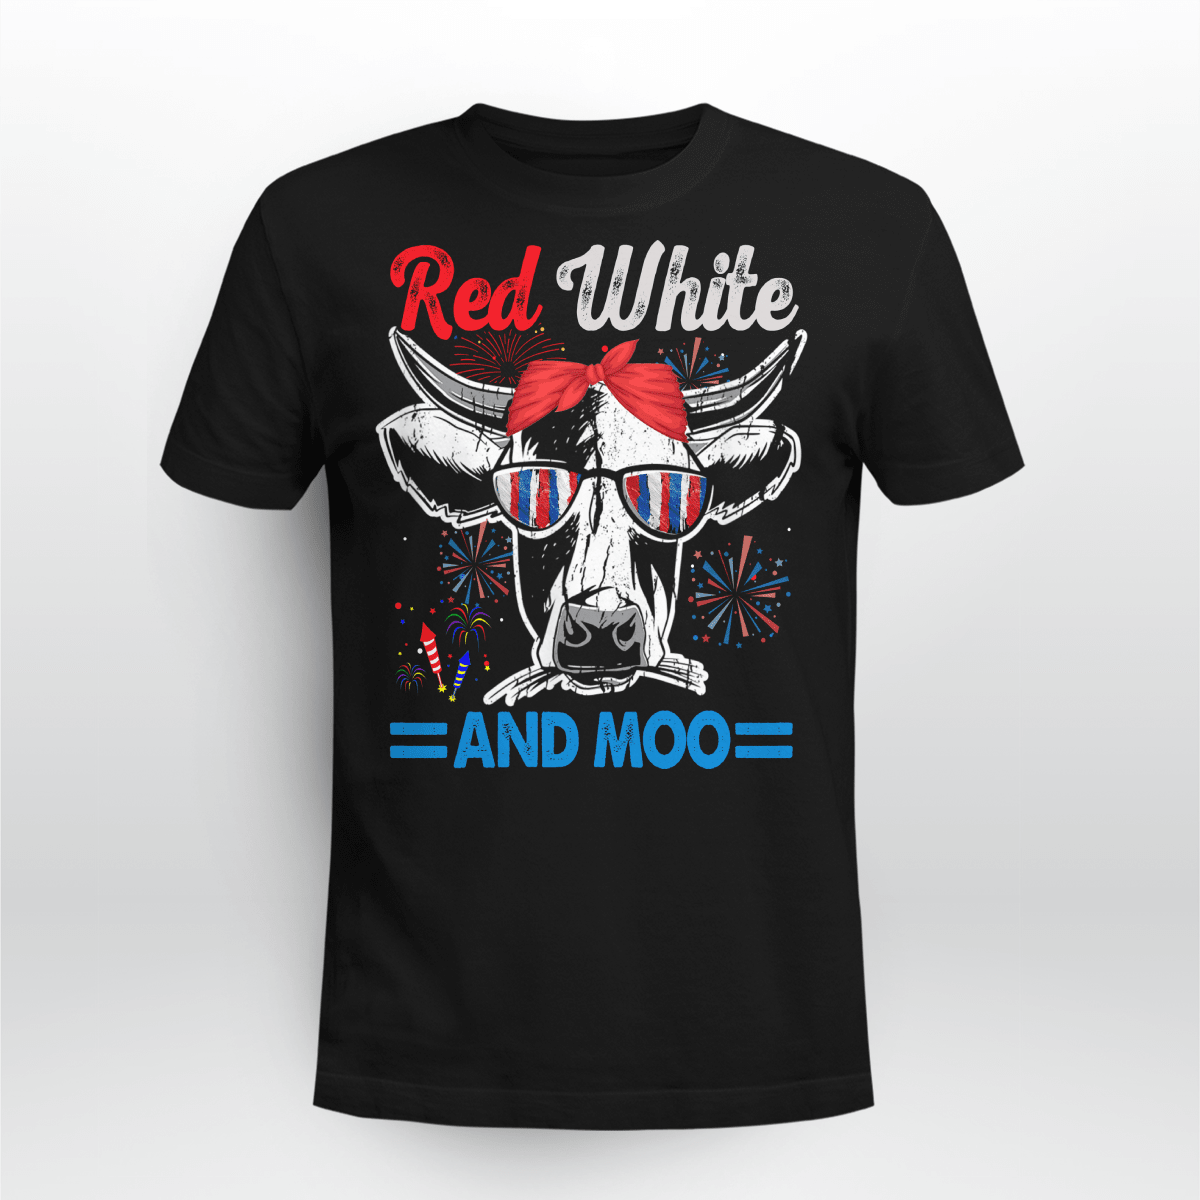 Red White And Moo